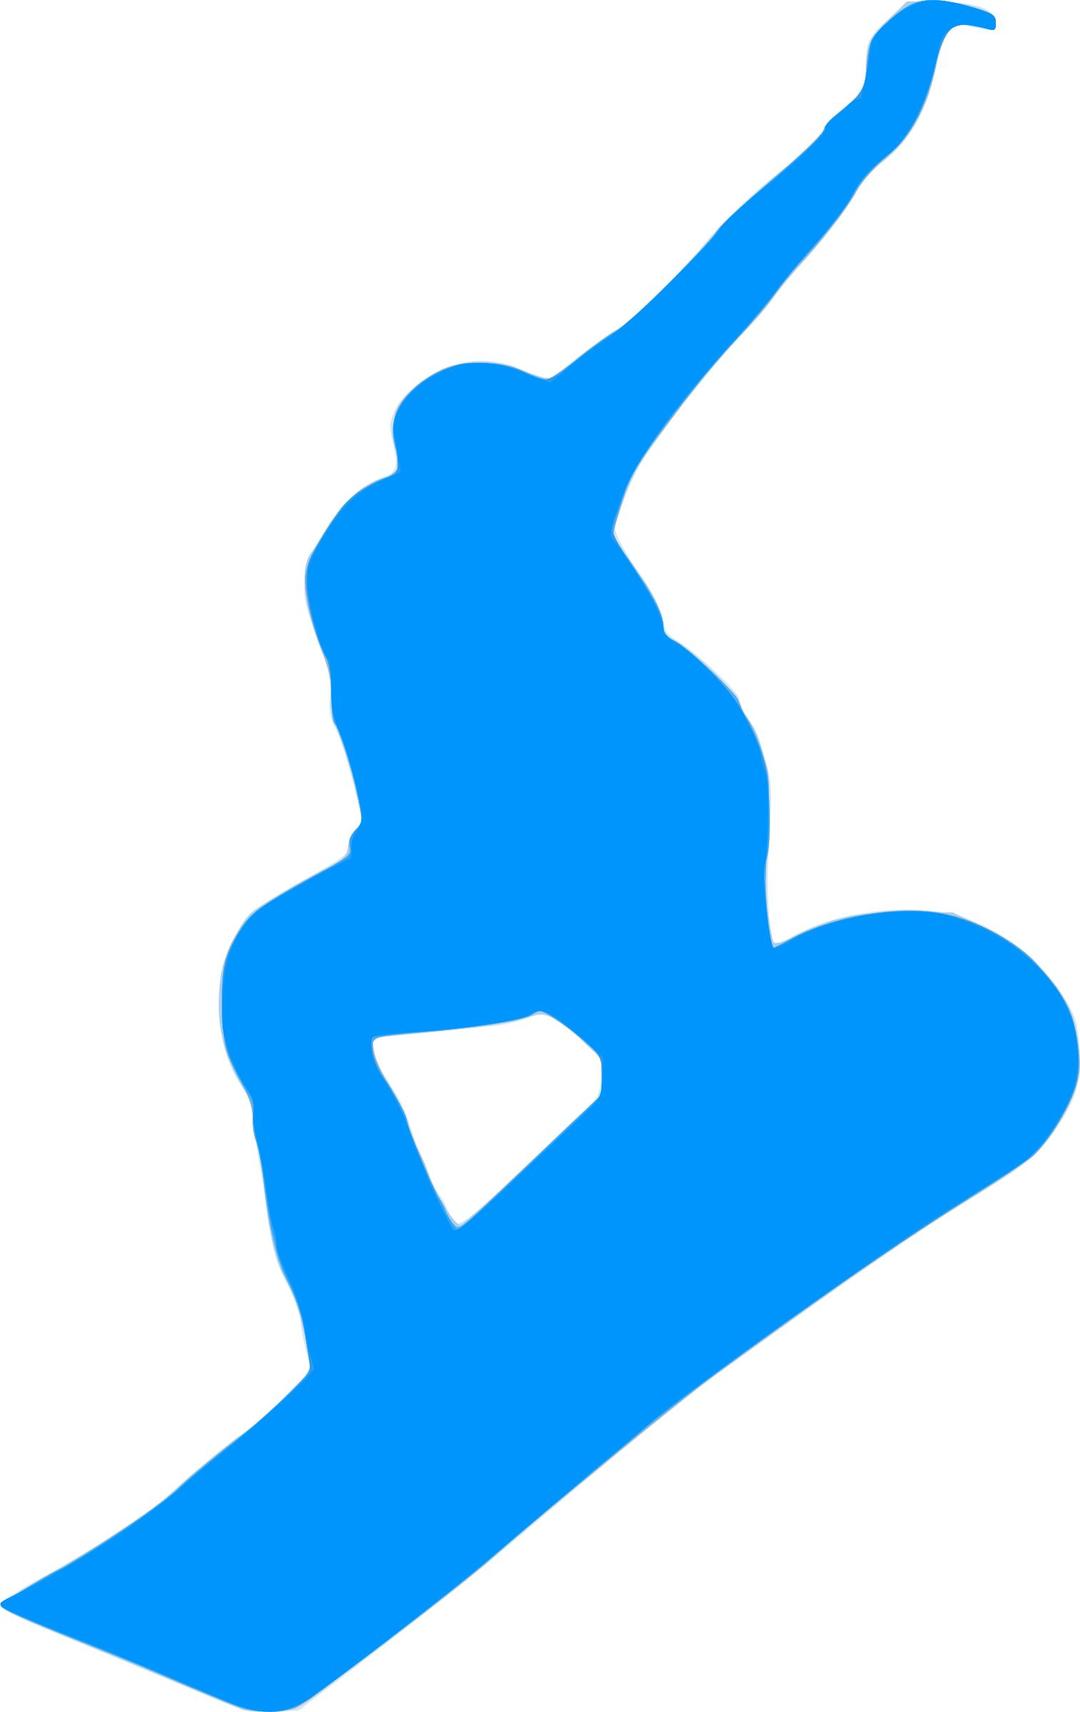 Silhouette Sports 20 png transparent